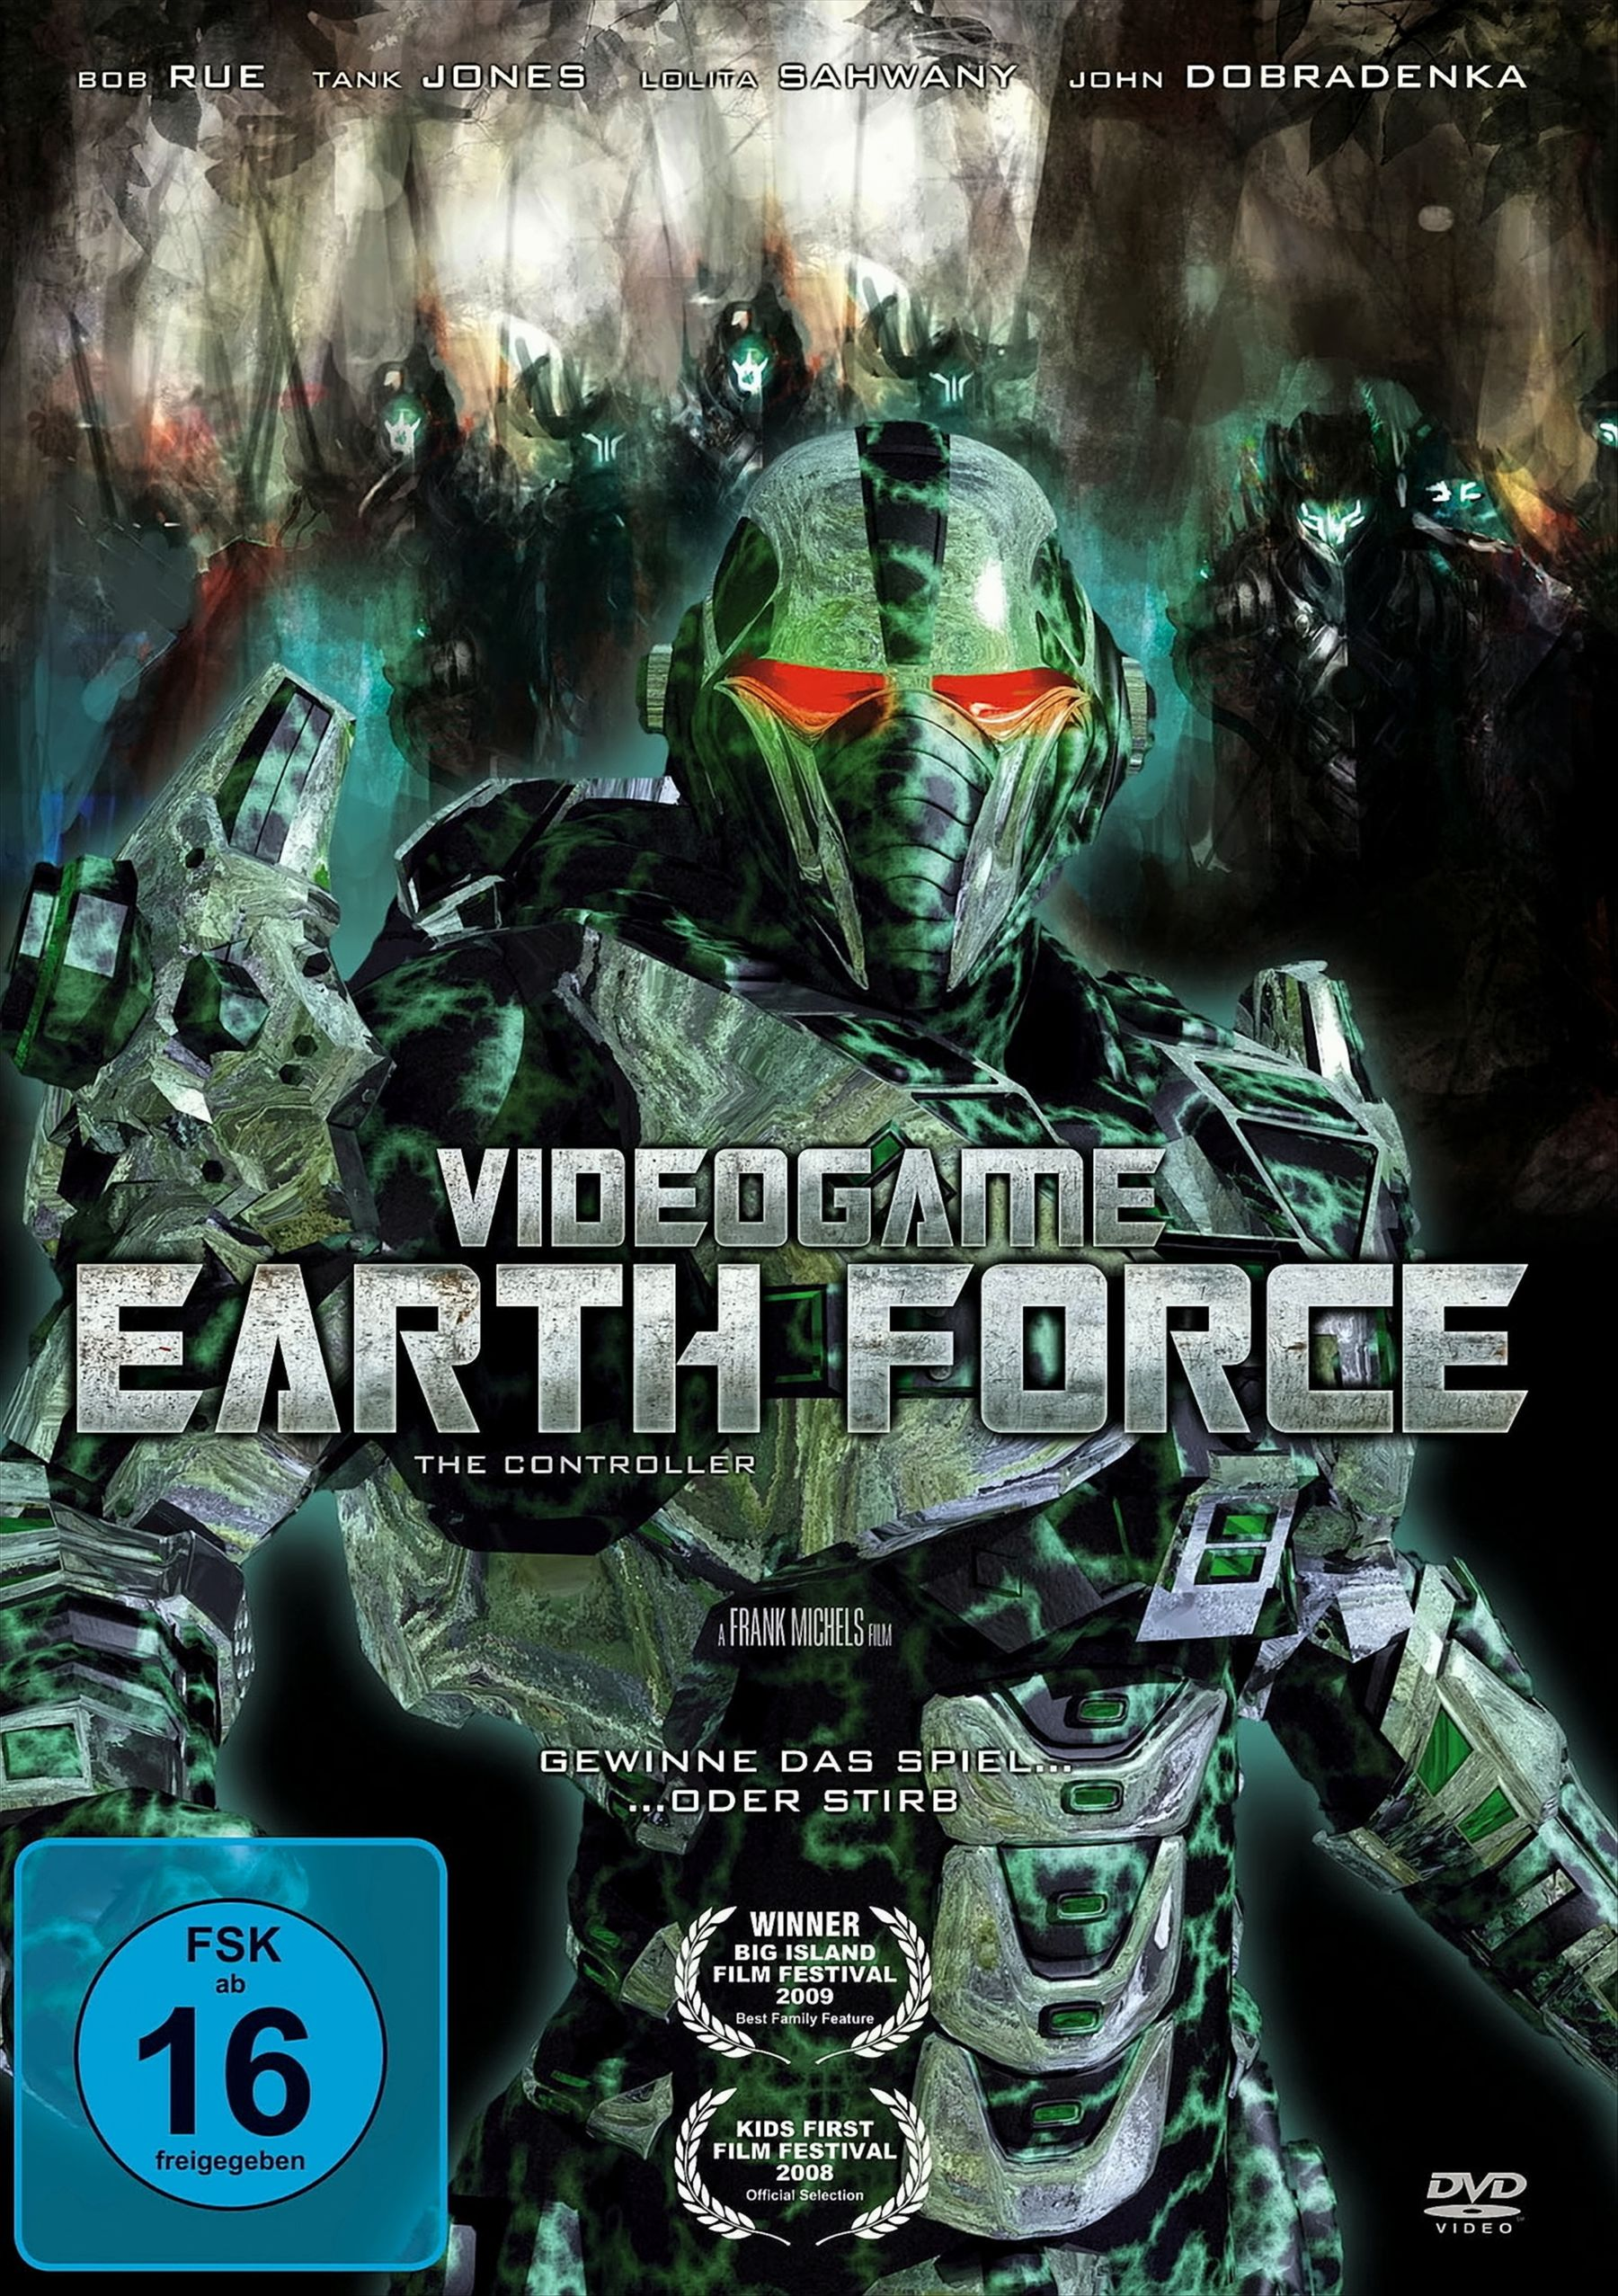 Force DVD Videogame Earth